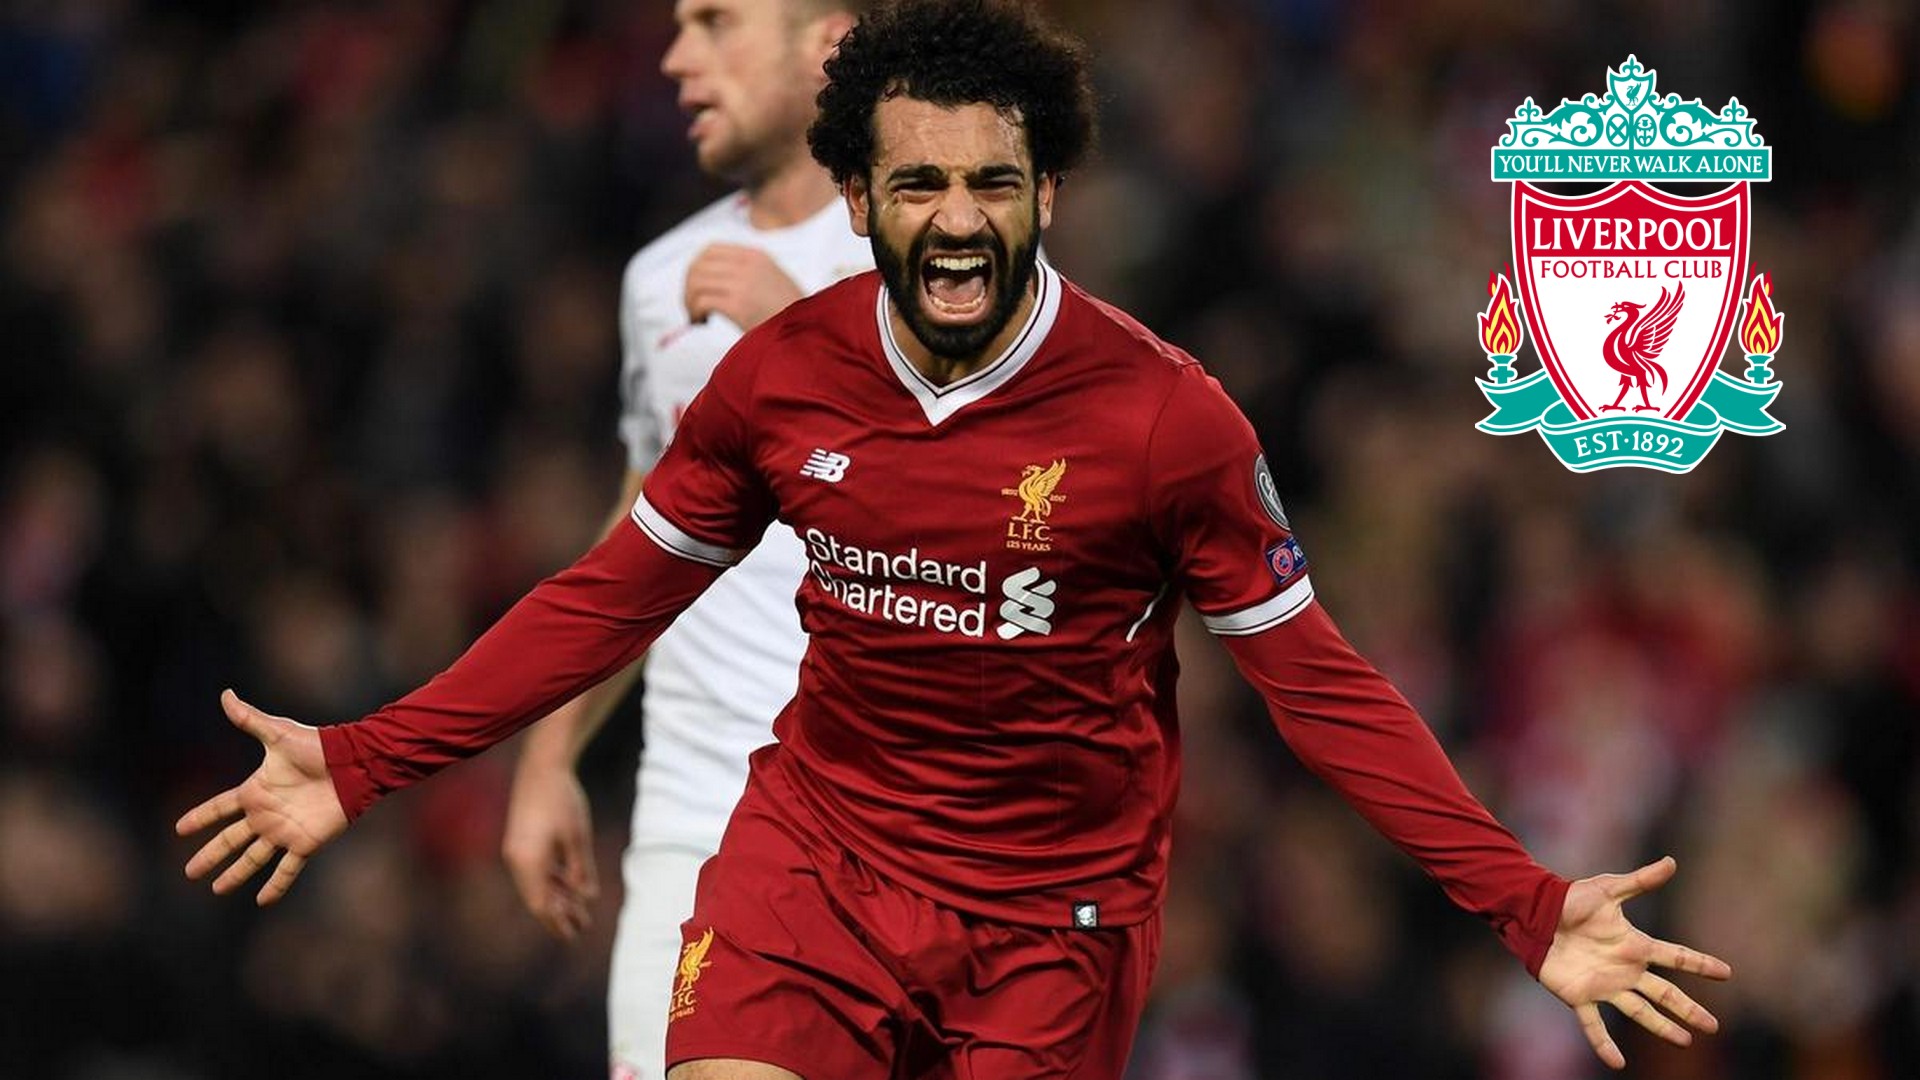 Best Mohamed Salah Liverpool Wallpaper with resolution 1920X1080 pixel. You can use this wallpaper as background for your desktop Computer Screensavers, Android or iPhone smartphones